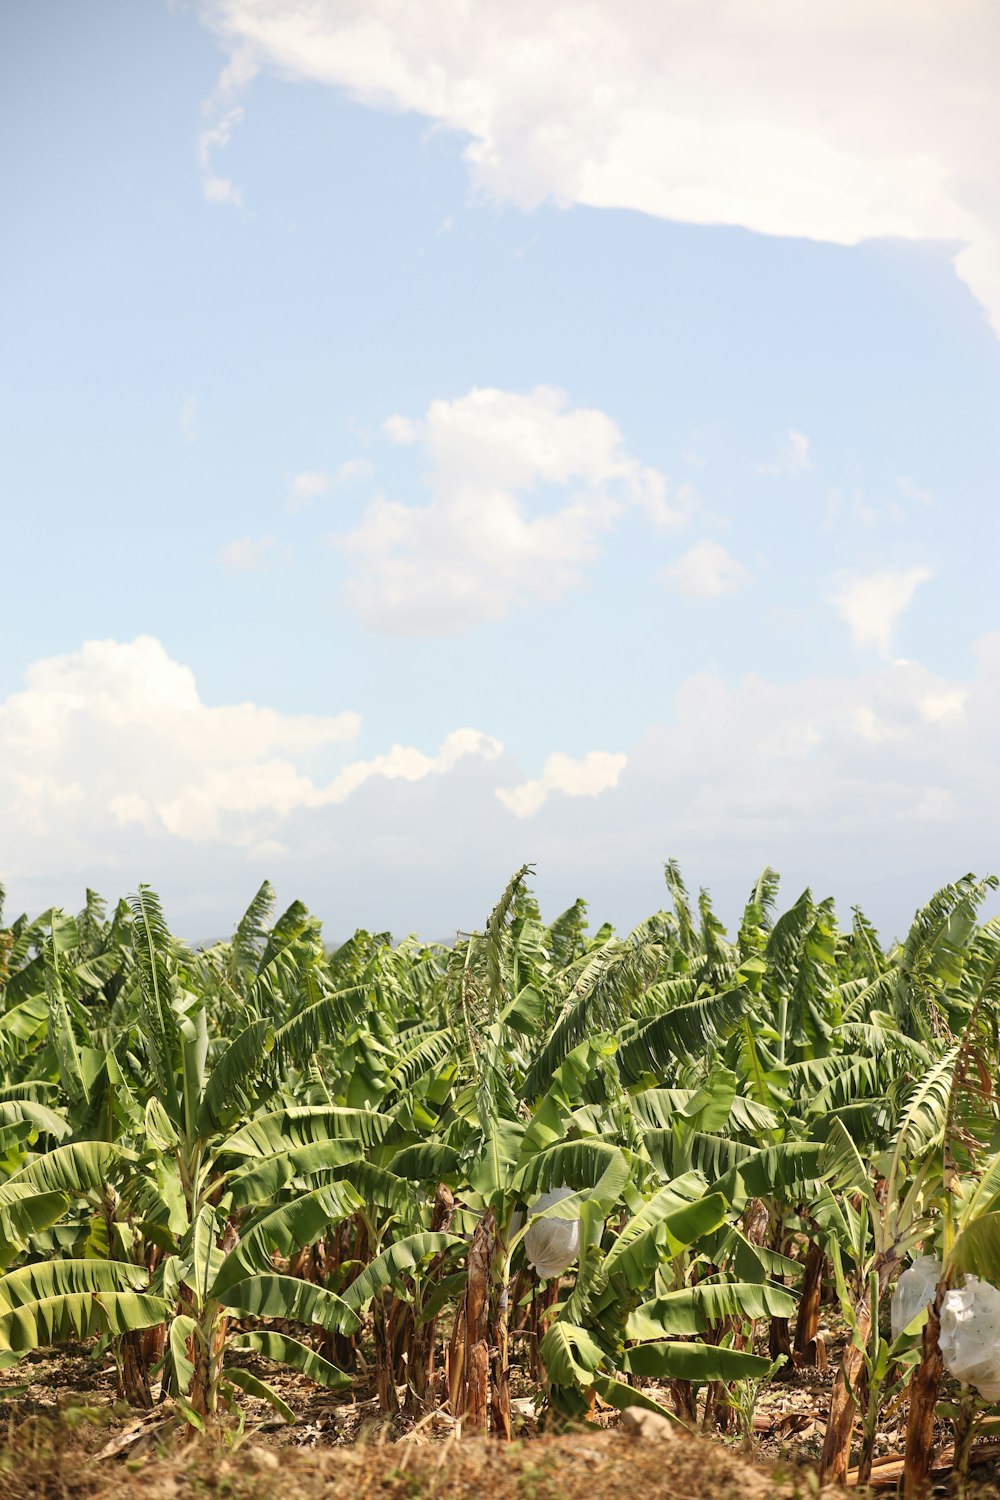 a field full of green bananas under a cloudy blue sky